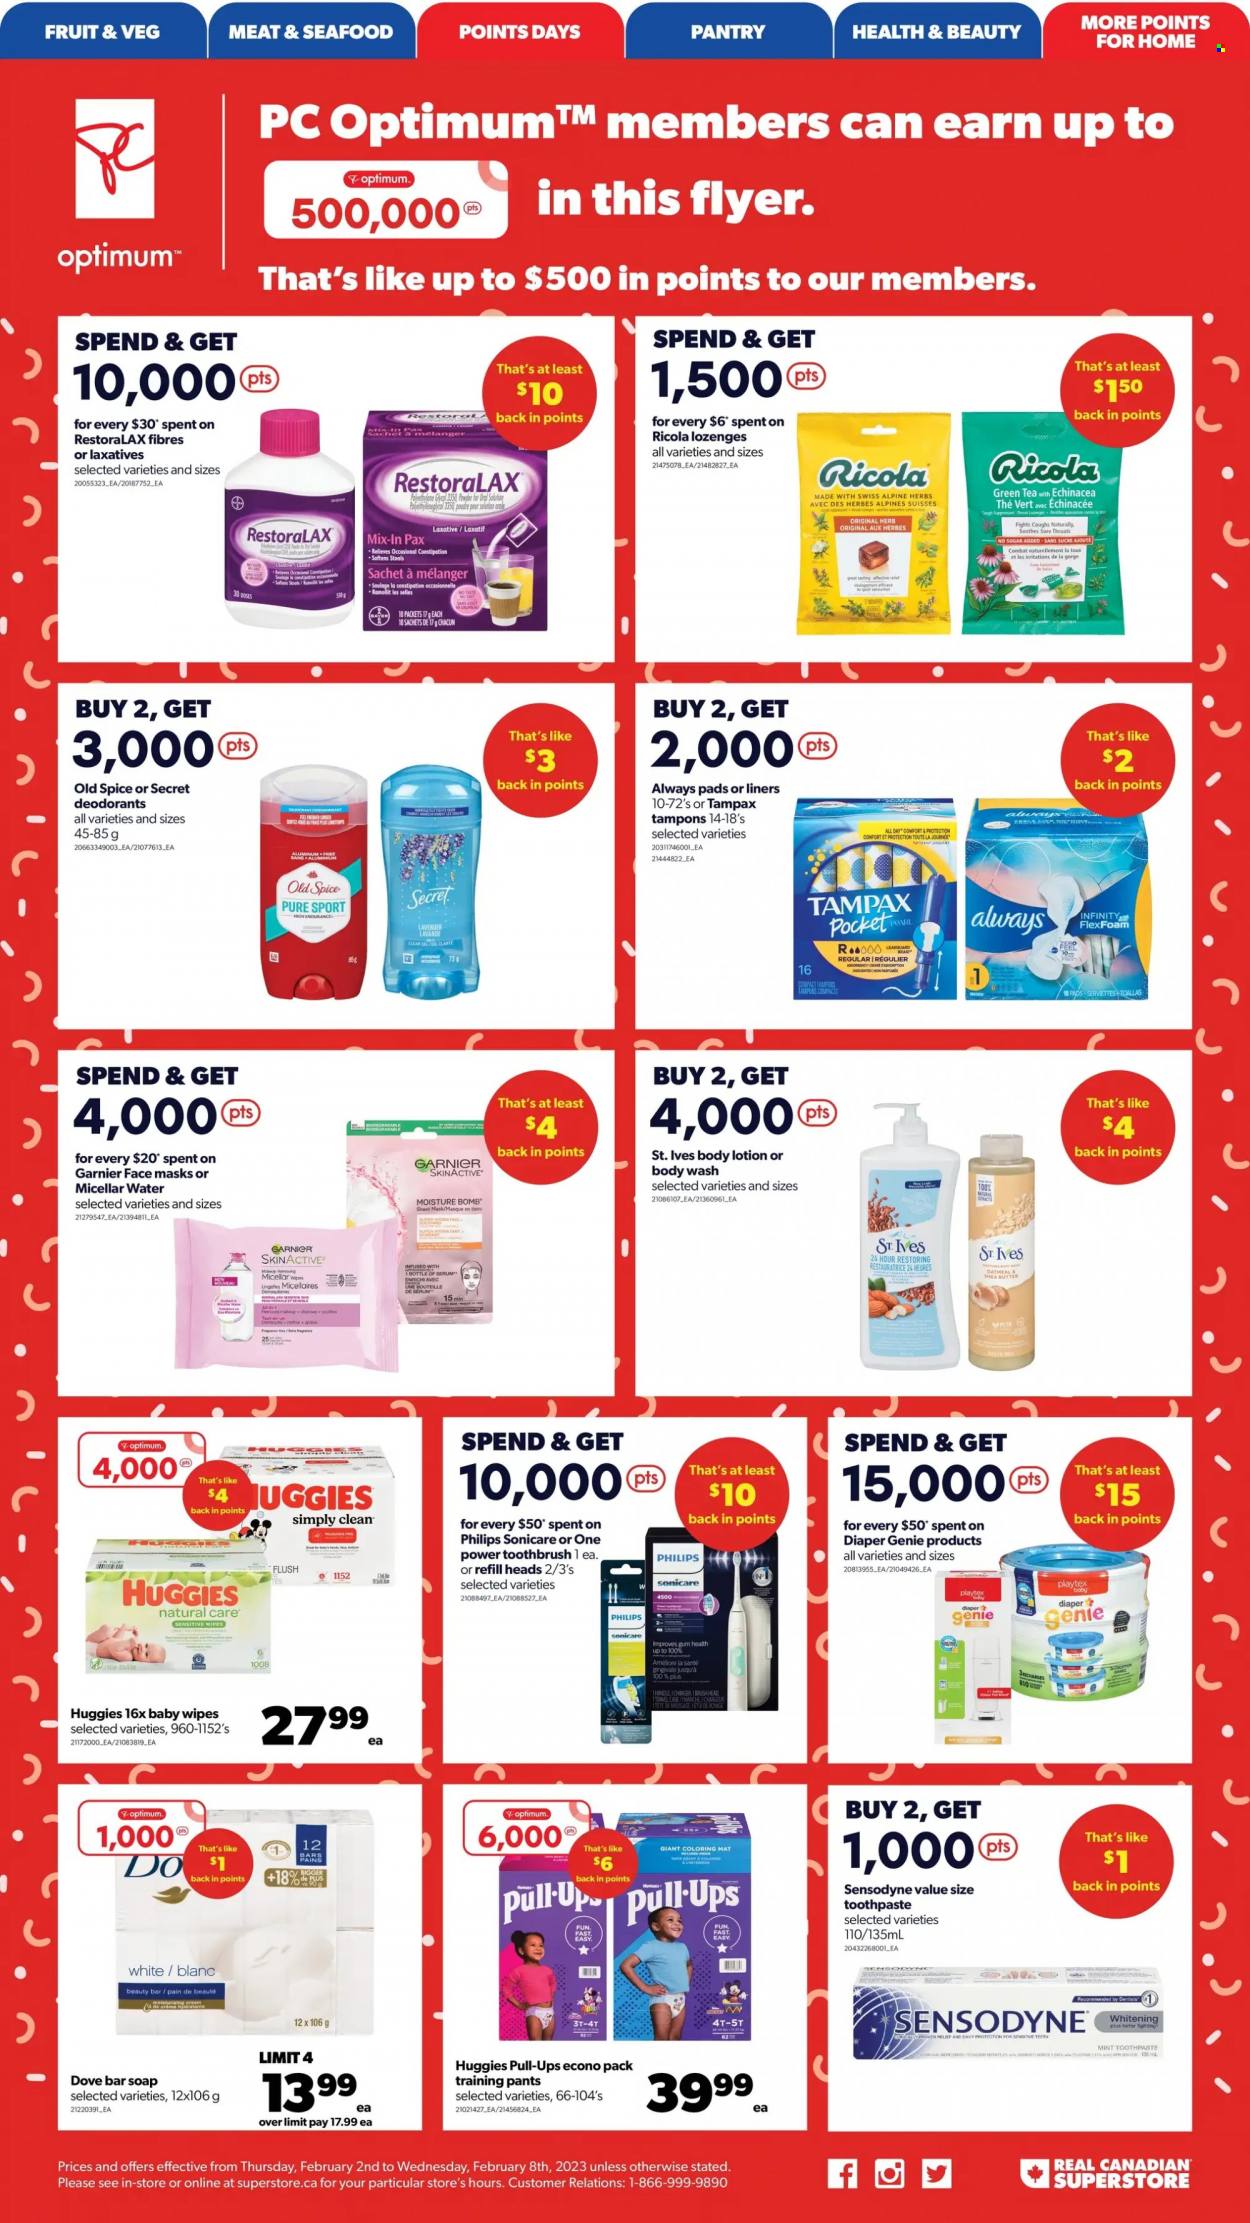 thumbnail - Real Canadian Superstore Flyer - February 02, 2023 - February 08, 2023 - Sales products - Philips, seafood, Dove, Ricola, spice, green tea, wipes, pants, baby wipes, baby pants, body wash, soap bar, soap, toothbrush, toothpaste, Always pads, sanitary pads, tampons, micellar water, face mask, Infinity, body lotion, Optimum, Sonicare, Pax, Garnier, Tampax, Huggies, Old Spice, Sensodyne, deodorant. Page 5.